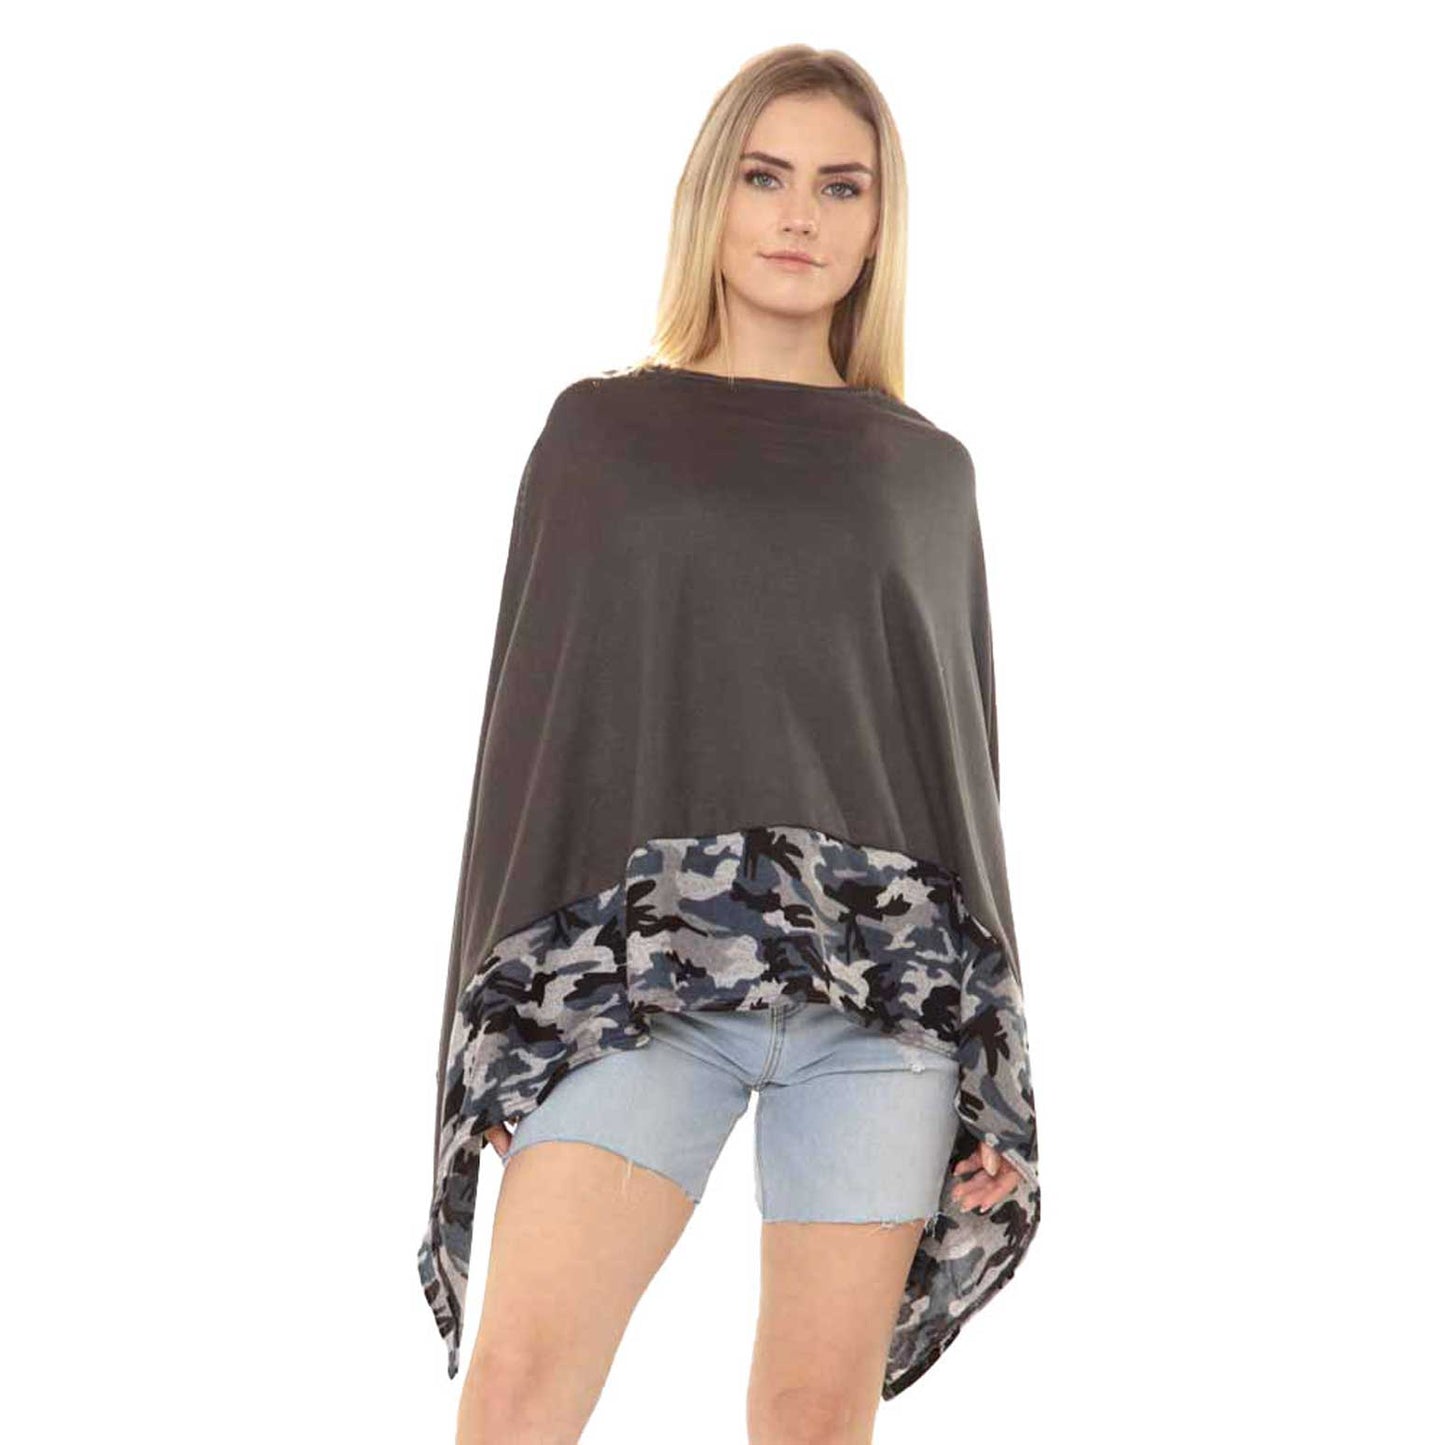 Gray Camouflage Pattern Trim Poncho, This timeless trim Poncho is Soft, Lightweight and Breathable Fabric, Close to Skin, Comfortable to Wear. Sophisticated, flattering and cozy, this Poncho drapes beautifully for a relaxed, pulled-together look. Suitable for Weekend, Work, Holiday, Beach, Party, Club, Night, Evening, Date, Casual and Other Occasions in Spring, Summer and Autumn.